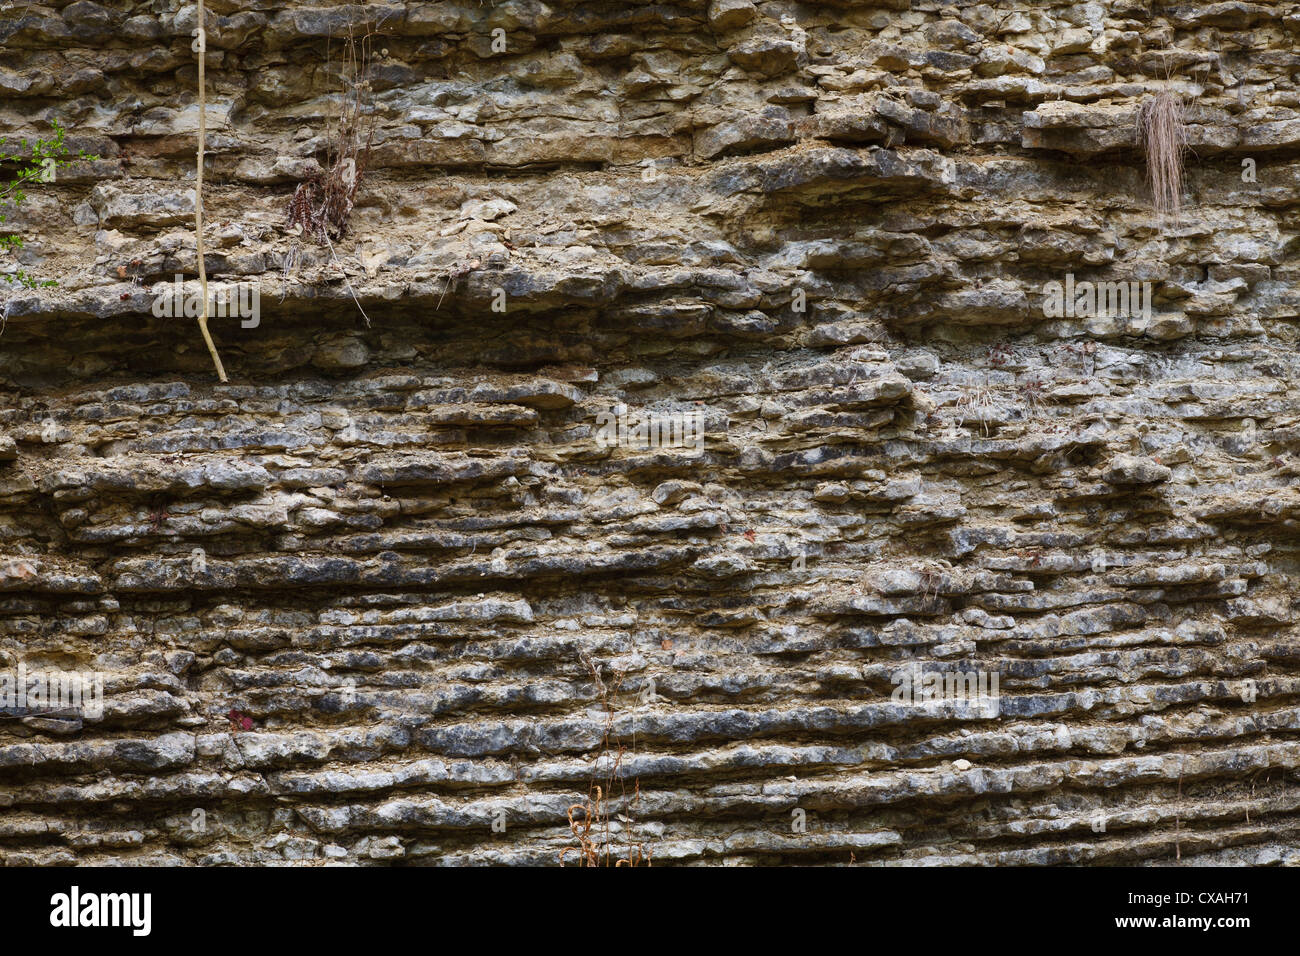 Silurian limestone in a quarry on Wenlock Edge, showing layered bedding. Knowle Quarry. Shropshire, England. Stock Photo